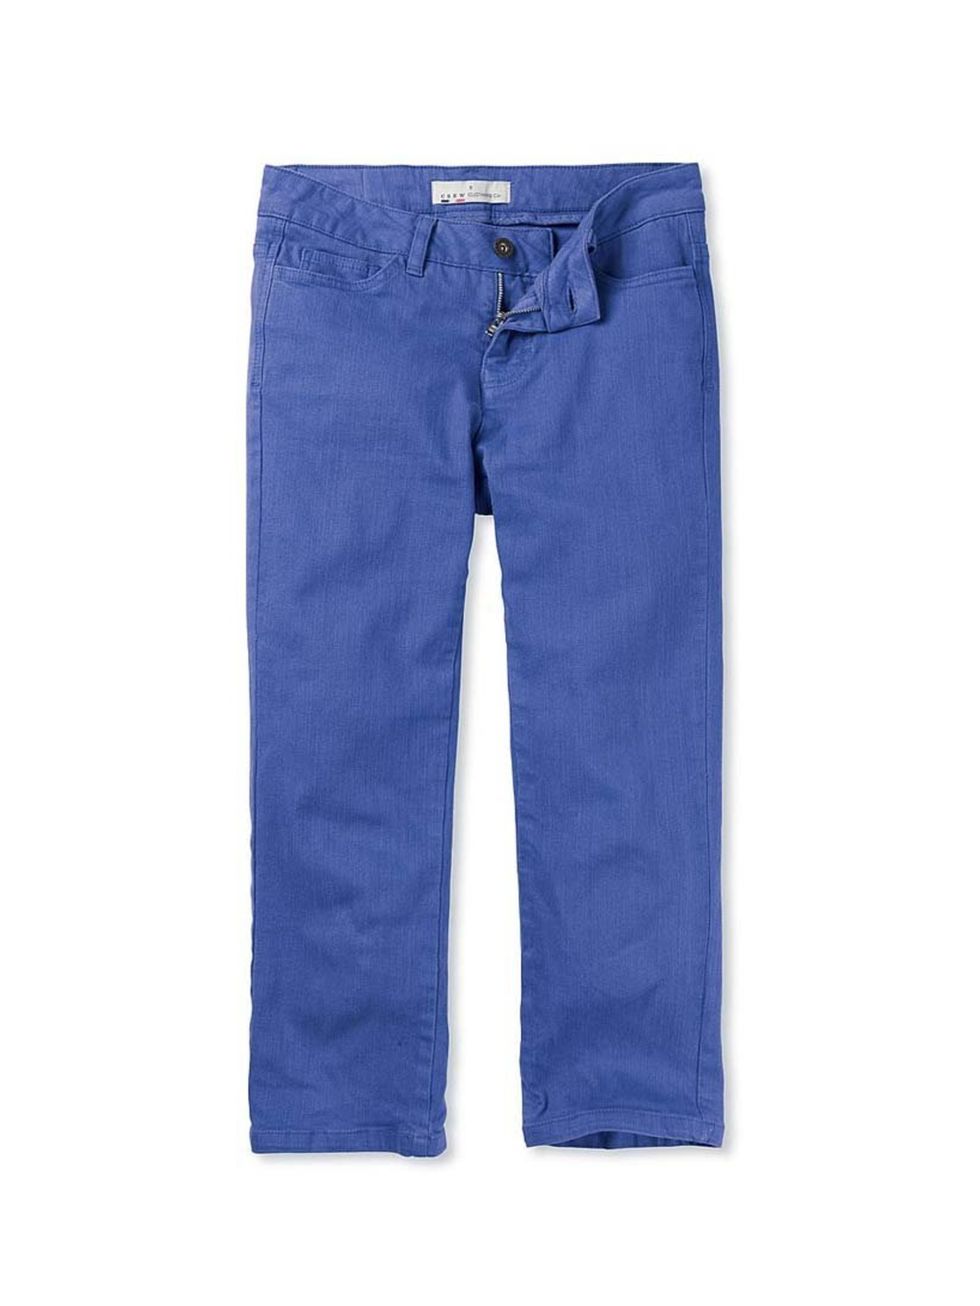 <p>Wear turned-up, with a white shirt or breton tee.</p><p><a href="http://www.crewclothing.co.uk/ballater-crop-wah003-royalblue/">Crew</a> trousers, £55</p>